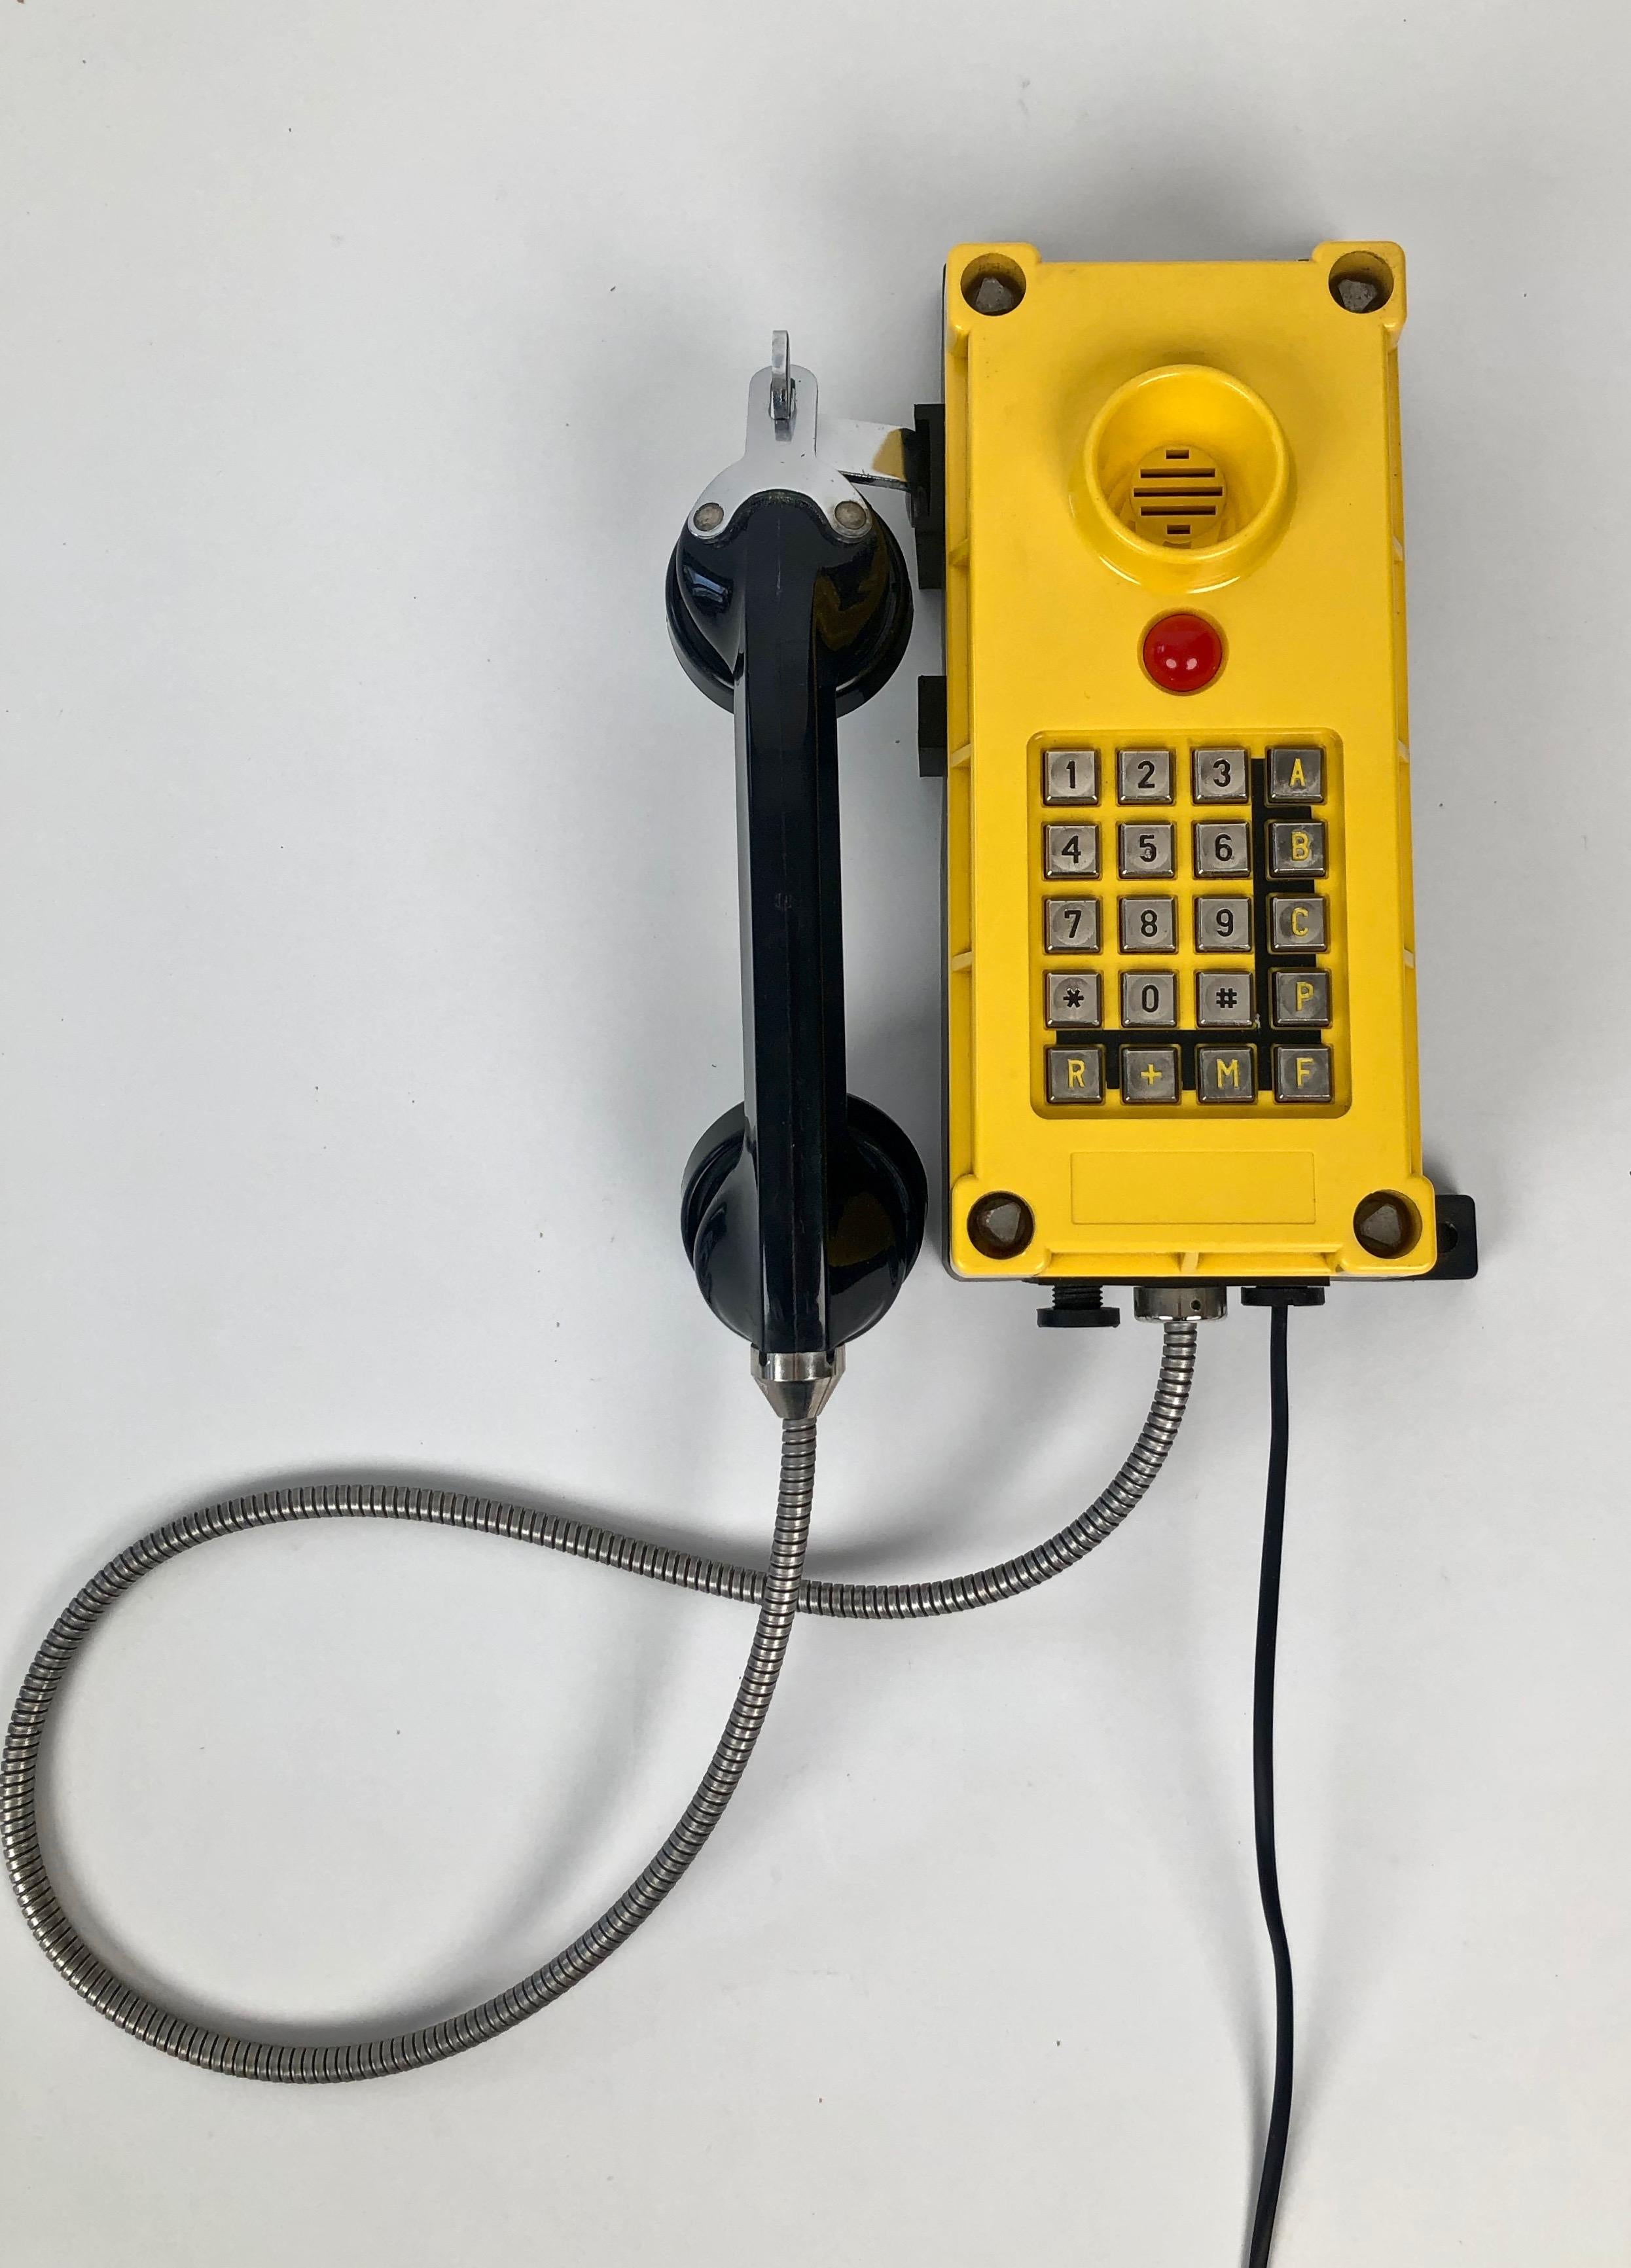 A pair of industrial telephones from the company Tesla Stropkov, a.s., produced 2004 in Slovakia. The telephone model 4 FN 153 27 has pased the EU regulations 1999/ 5/EU.
This telephone is designed for heavy industrial environment, for example: